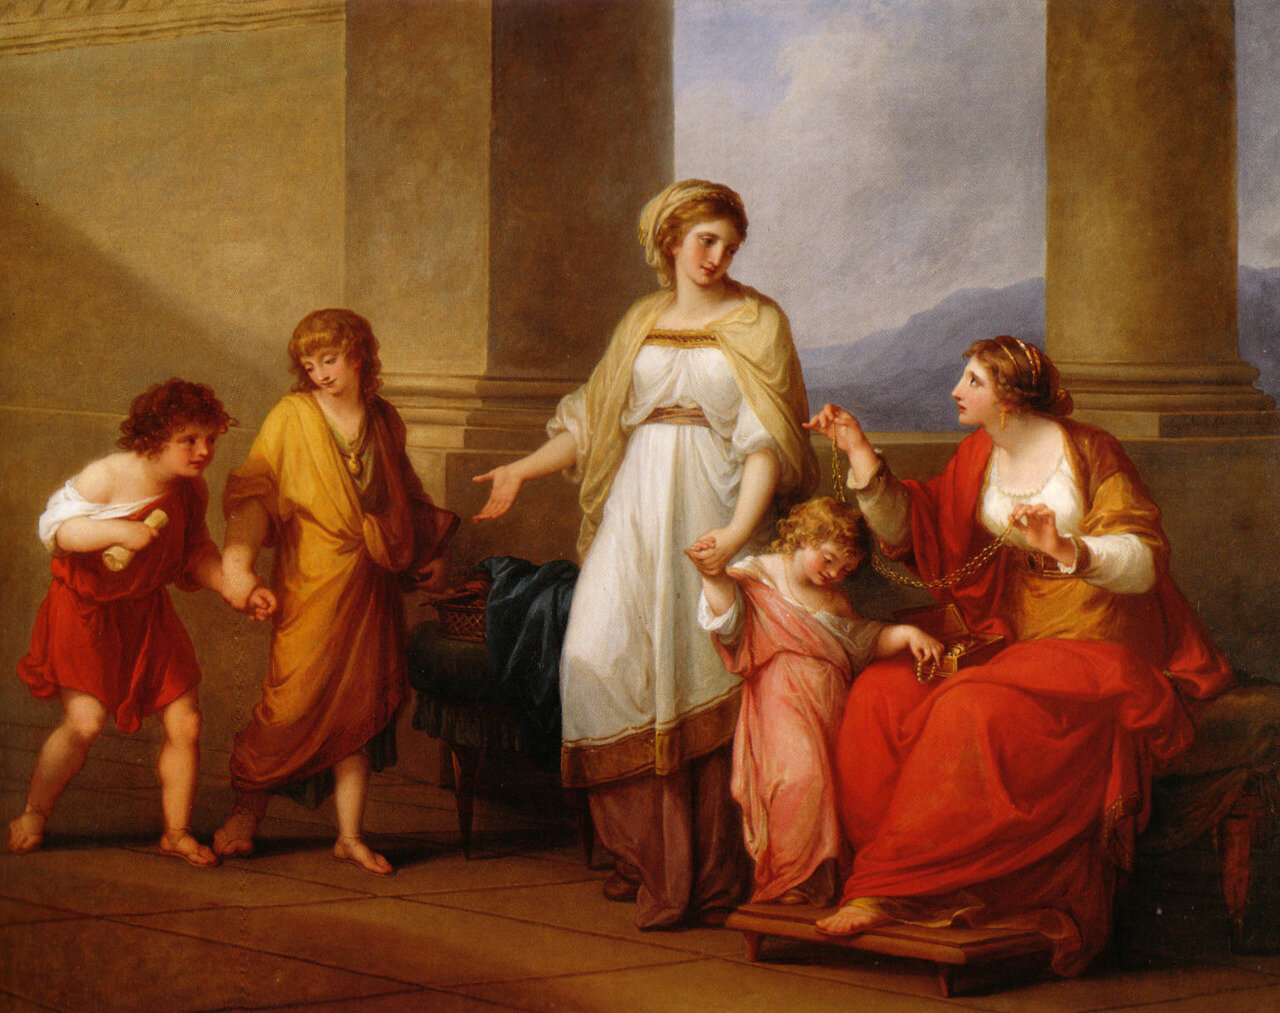 Angelica Kauffman, Cornelia, Mother of the Gracchi, Pointing to Her Children as Her Treasures, c. 1785 (Copy)